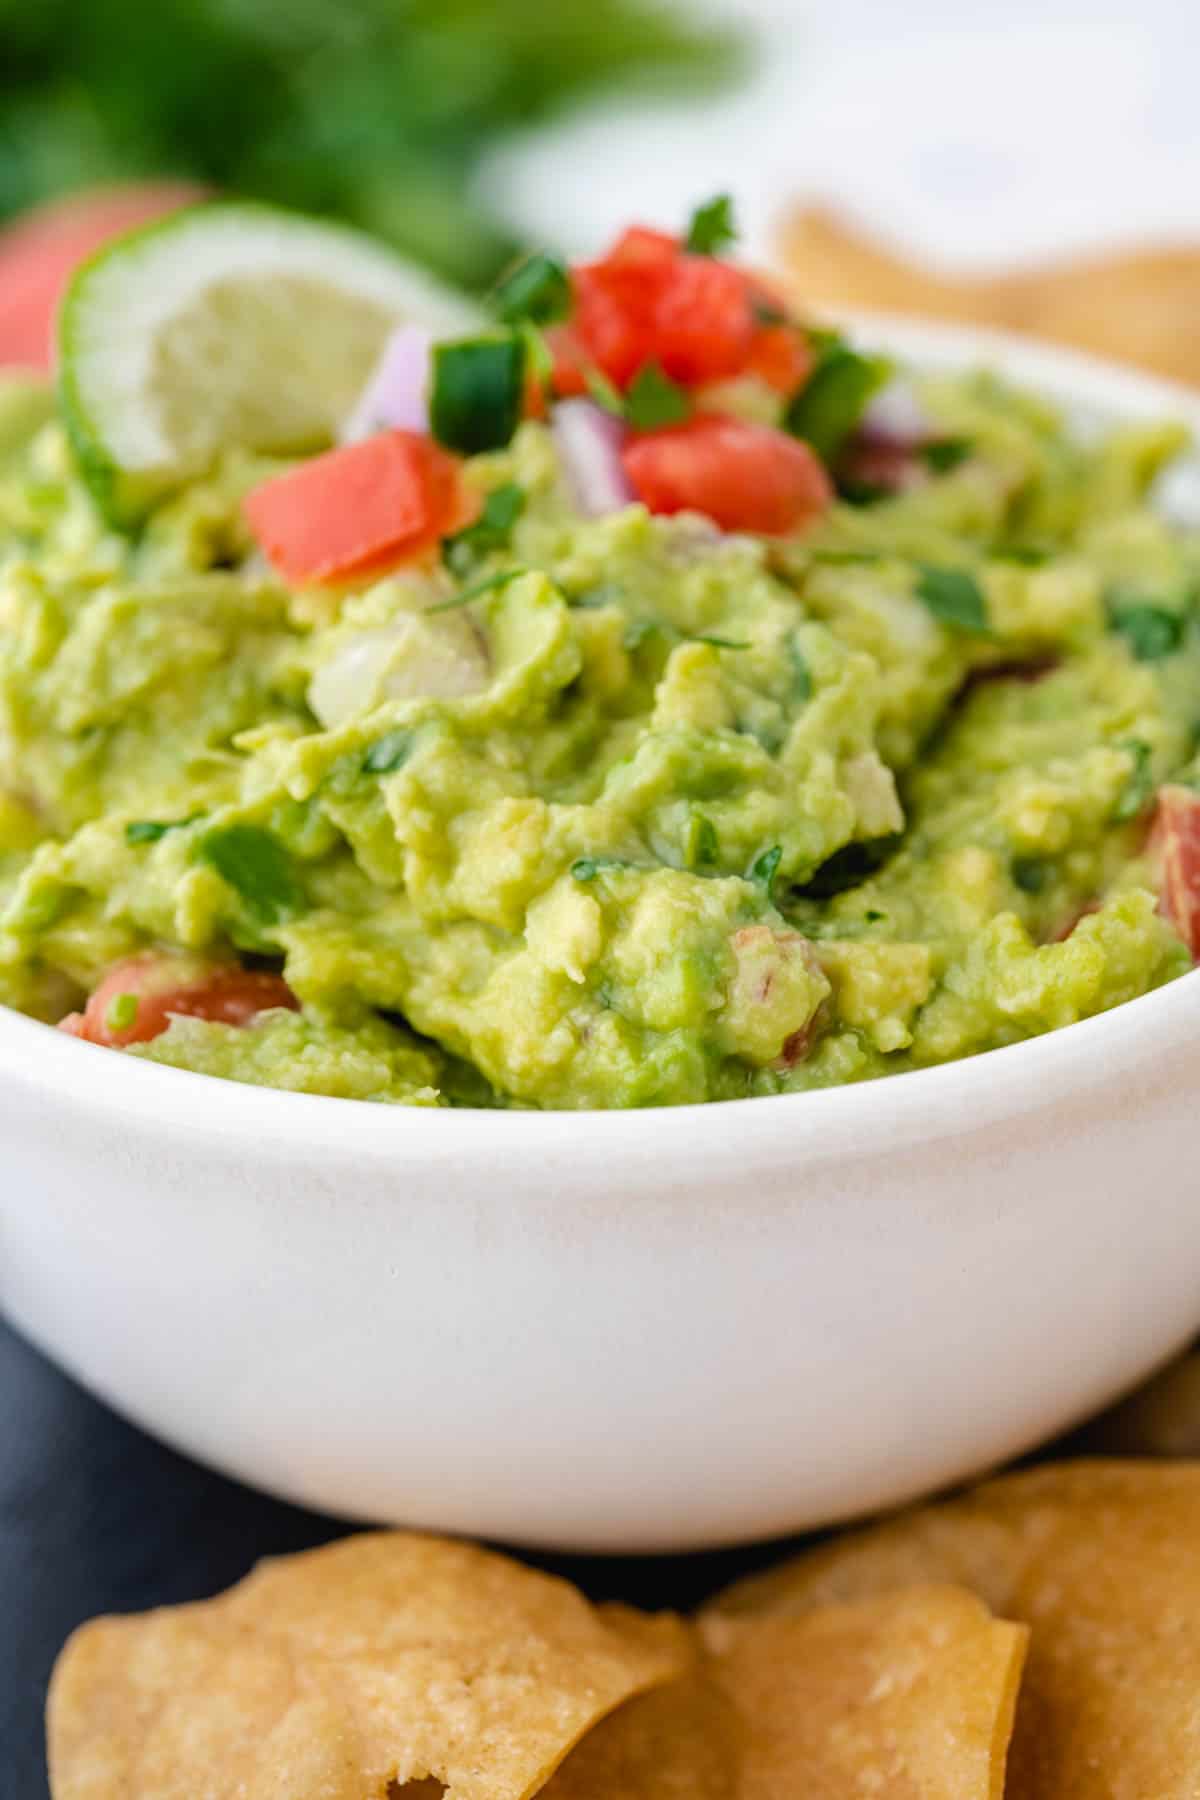 An up-close image of a white bowl filled with chunky guacamole.